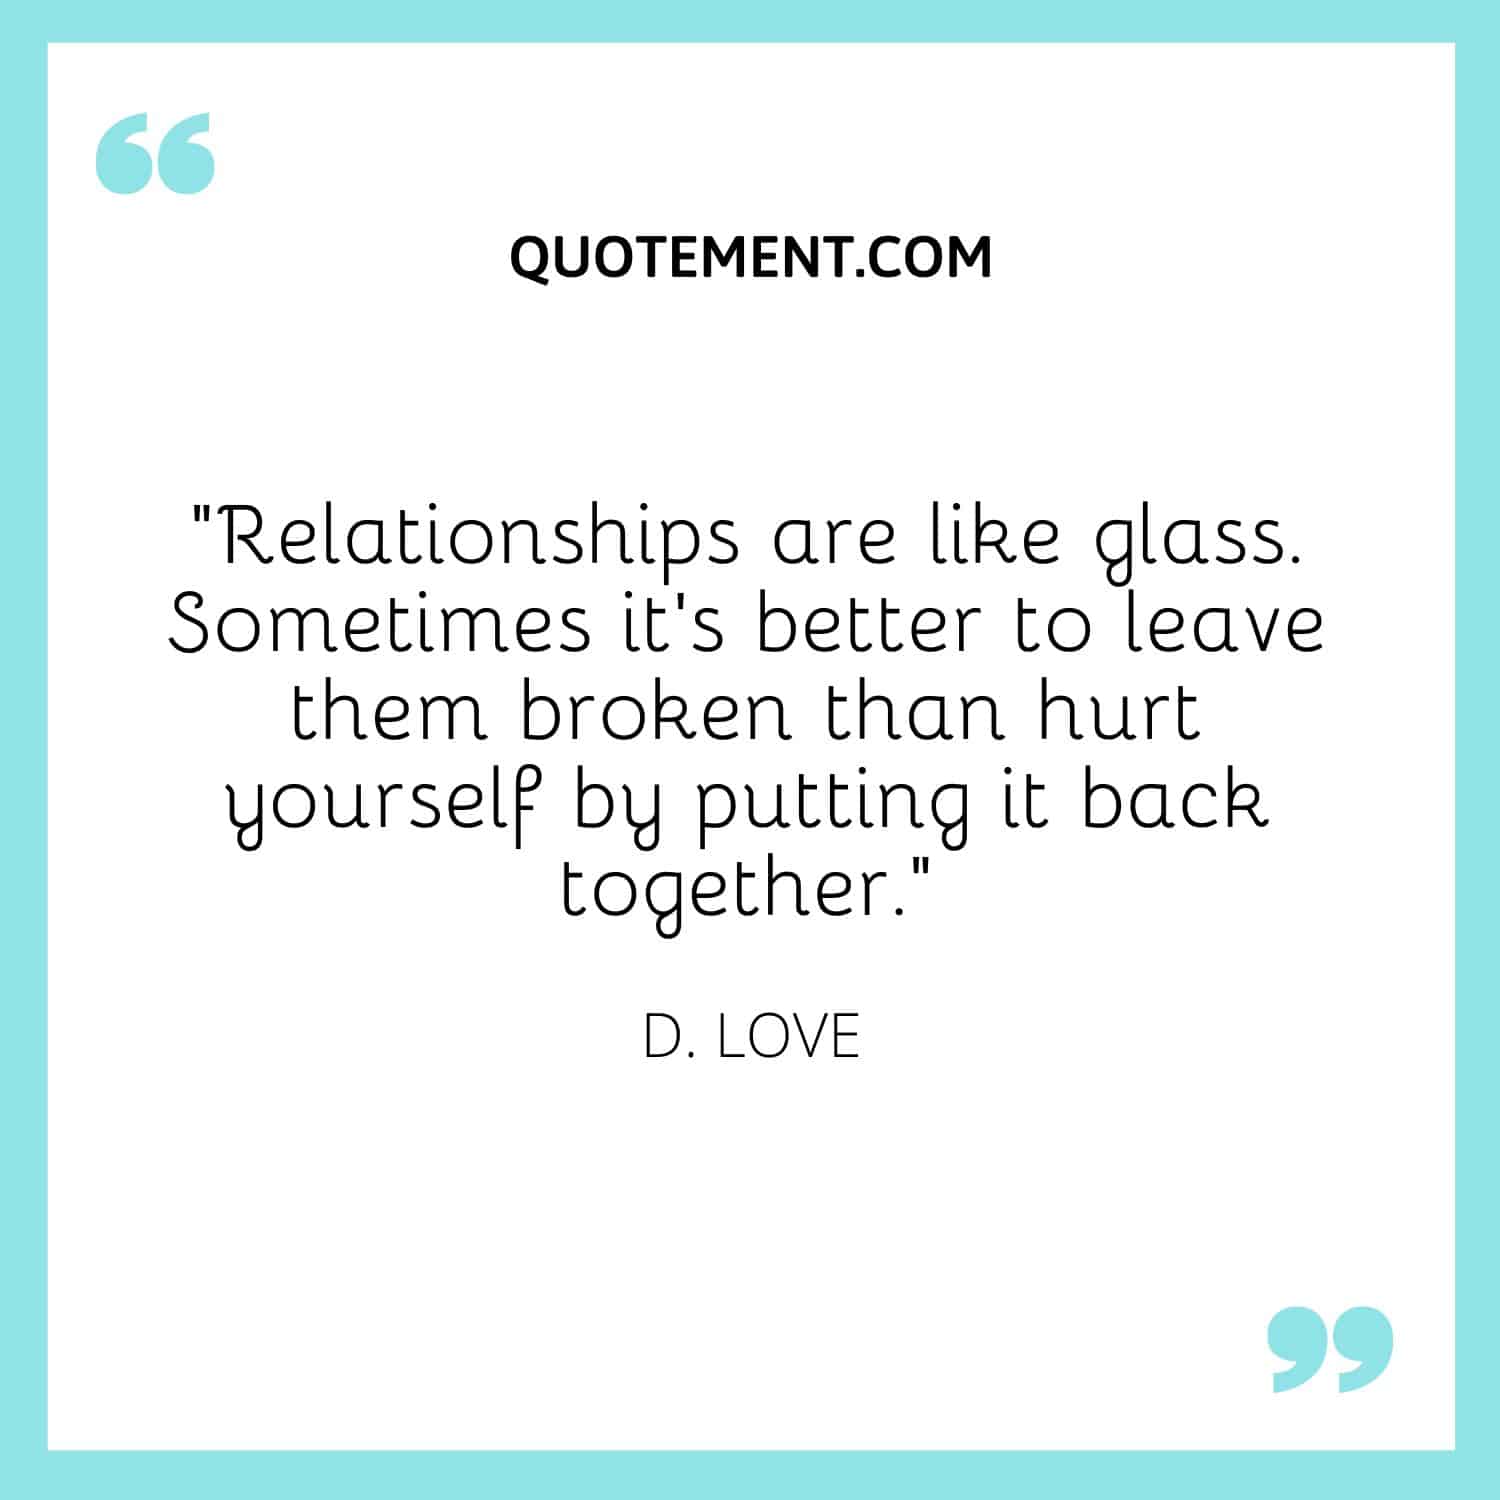 Relationships are like glass.